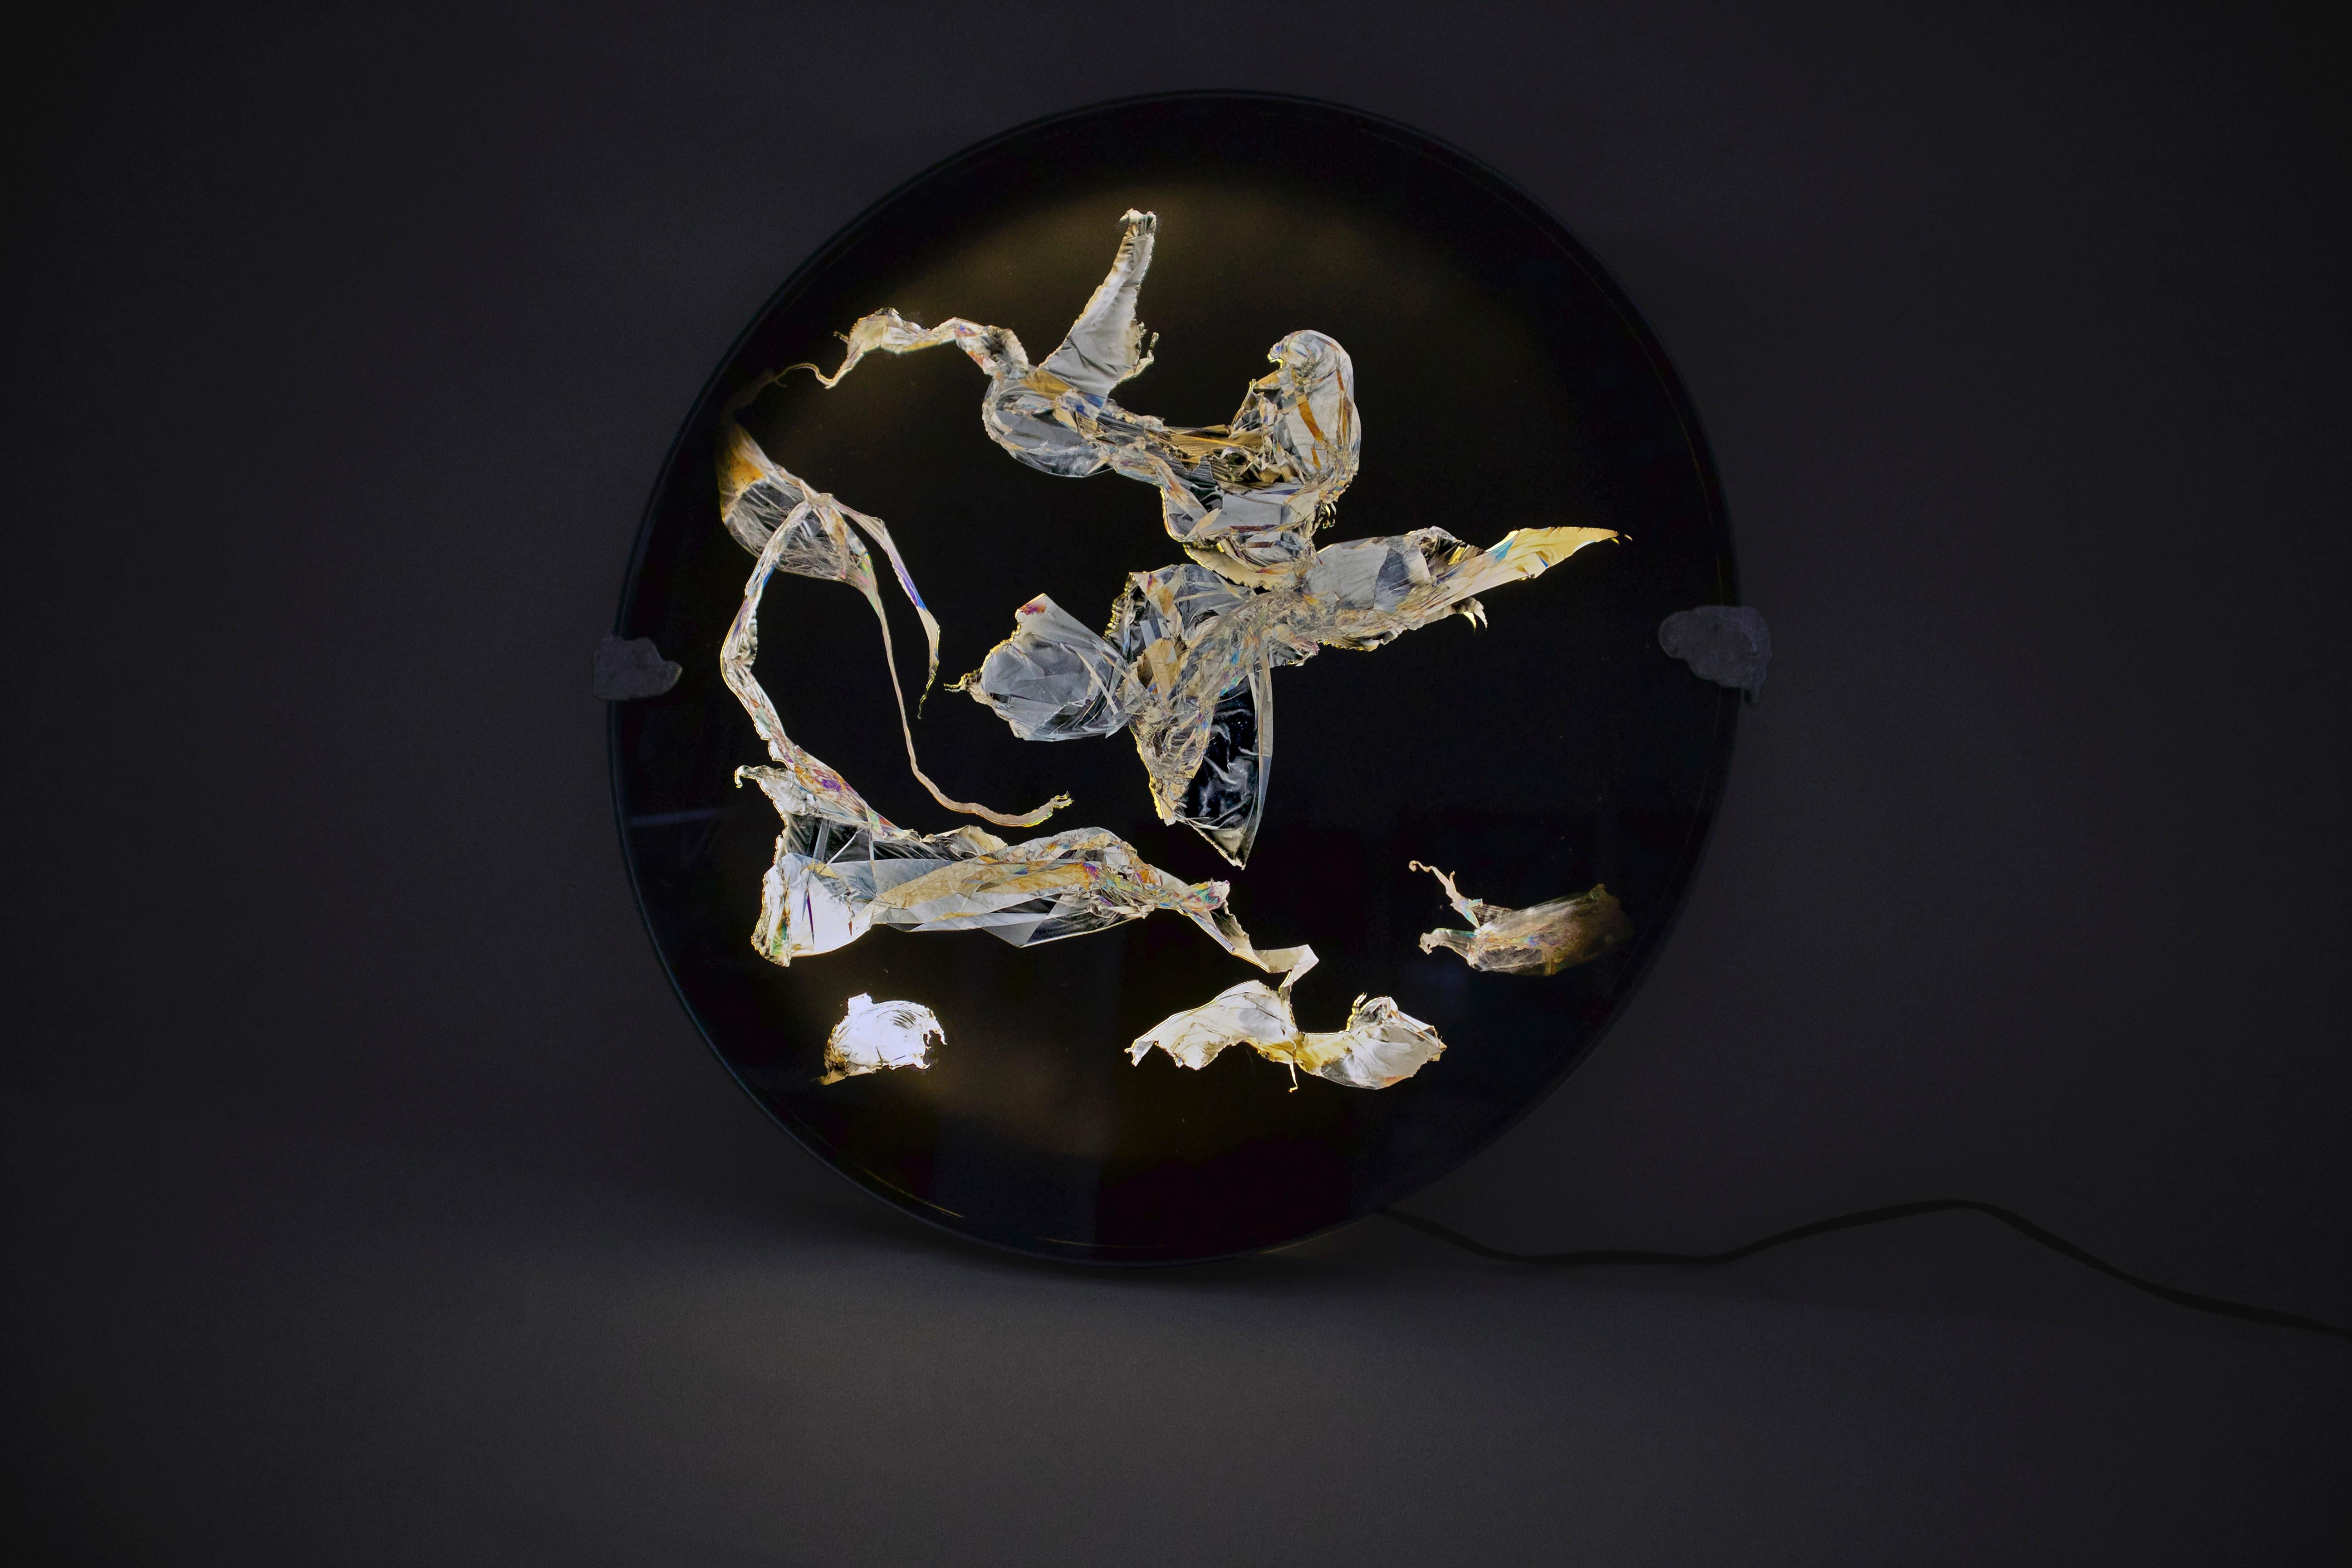 Wall Lamp I by Kajsa Willner
Dimensions: 36,5 x 4 cm
Materials: polarized filters, disposable plastic

POLARIZED PORTRAITS
Polarized portraits is a set of wall lights and lamps that use polarized light to reveal stress patterns in clear plastic,